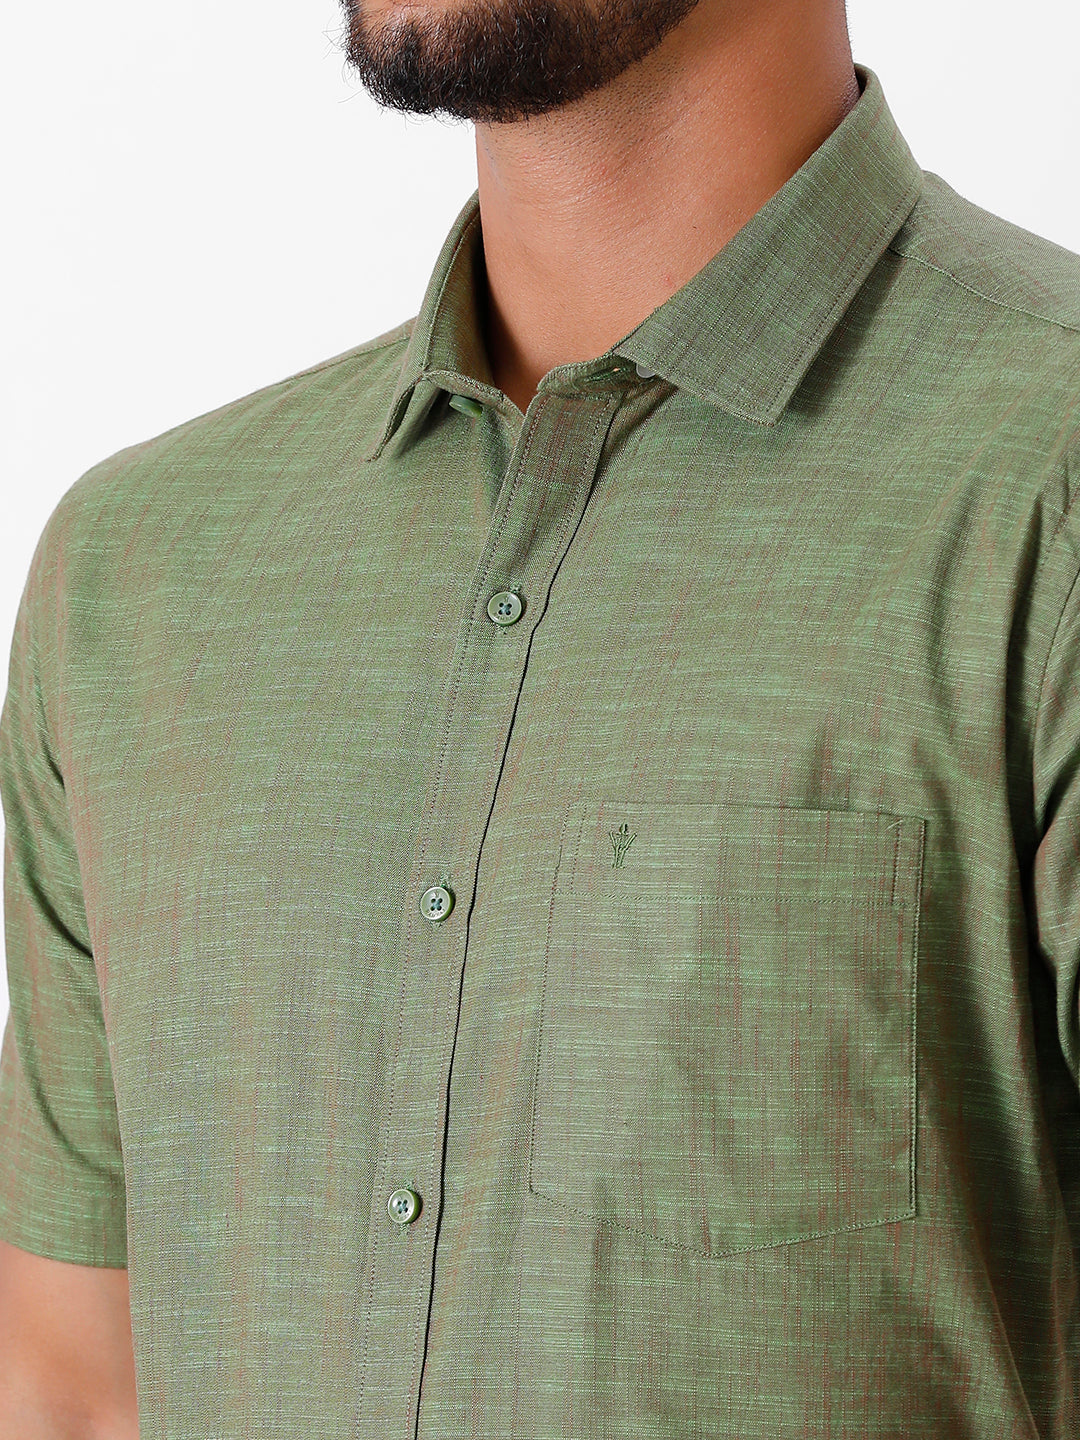 Mens Formal Shirt Half Sleeves Green CL2 GT19-Zoom view